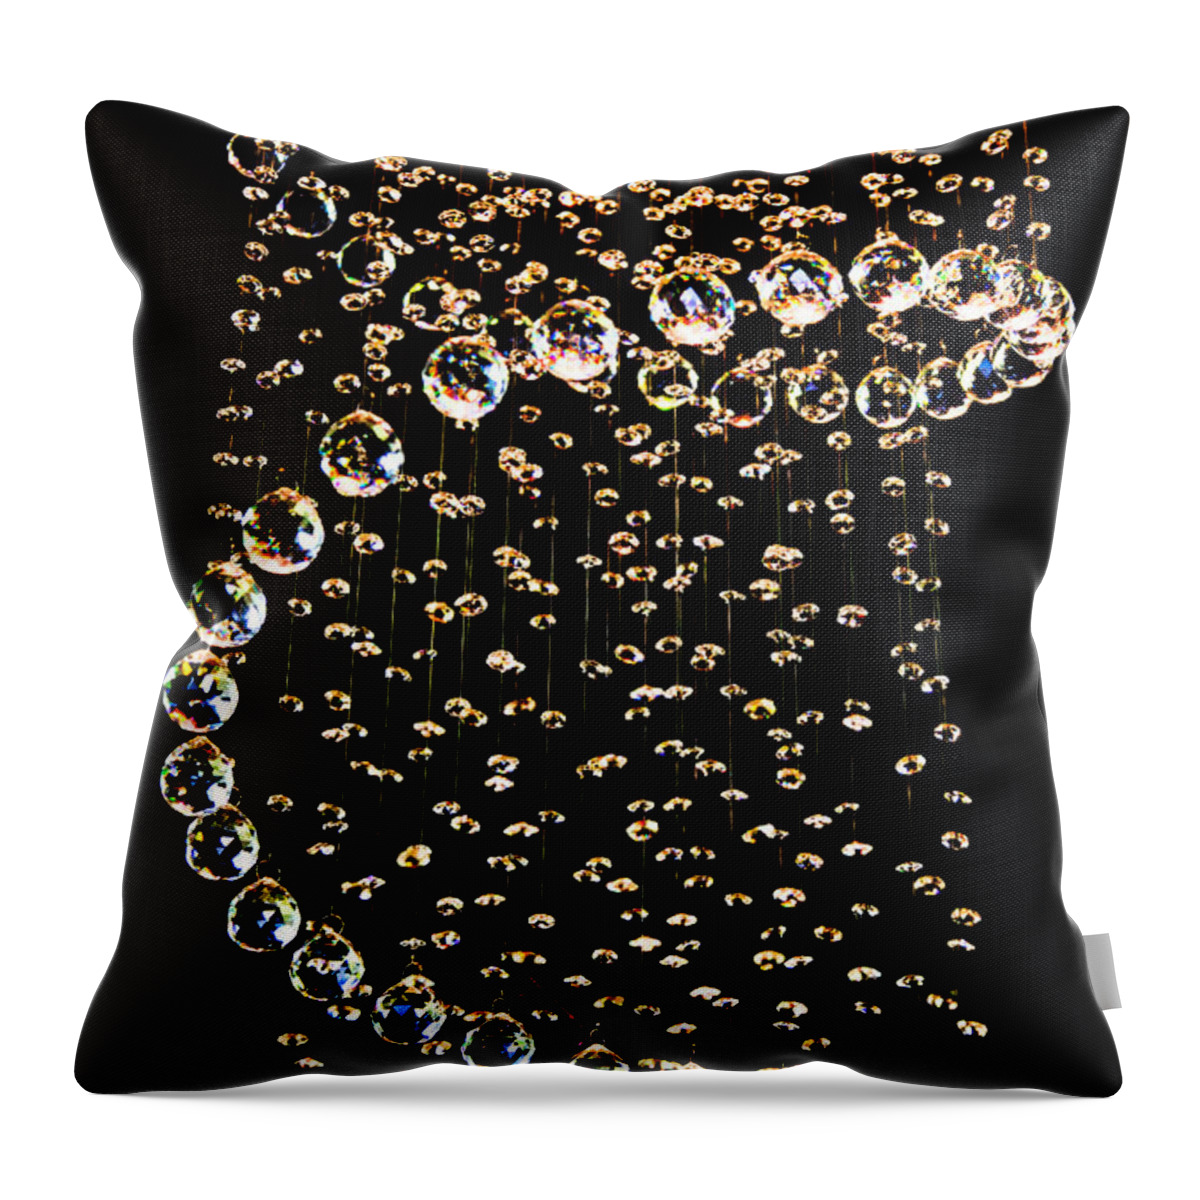 Rising Up Throw Pillow featuring the photograph Rising Up by Michelle Constantine